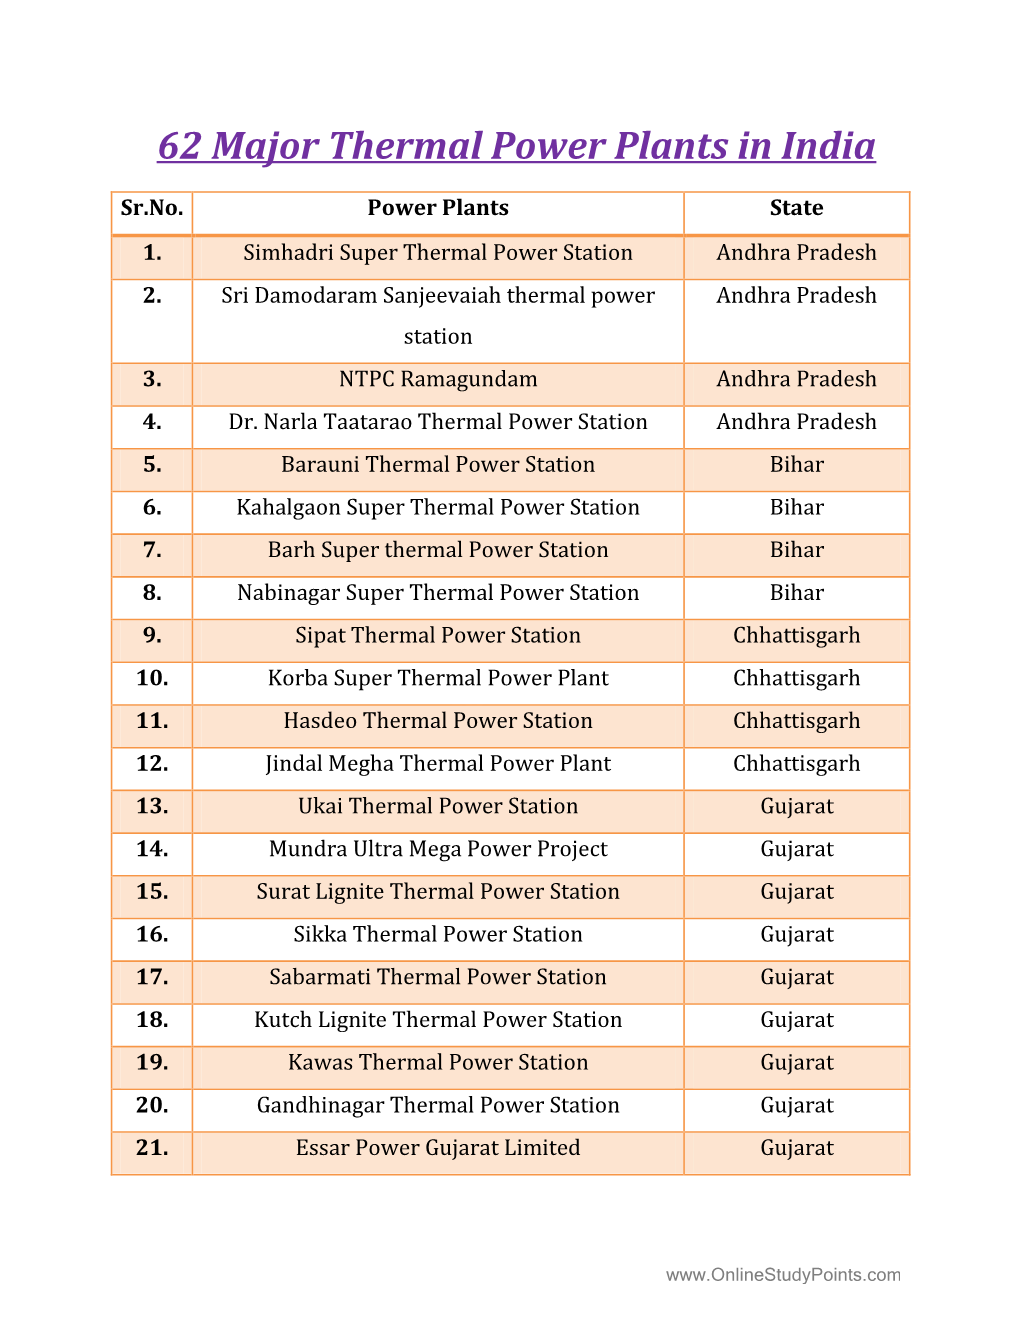 62 Major Thermal Power Plants in India